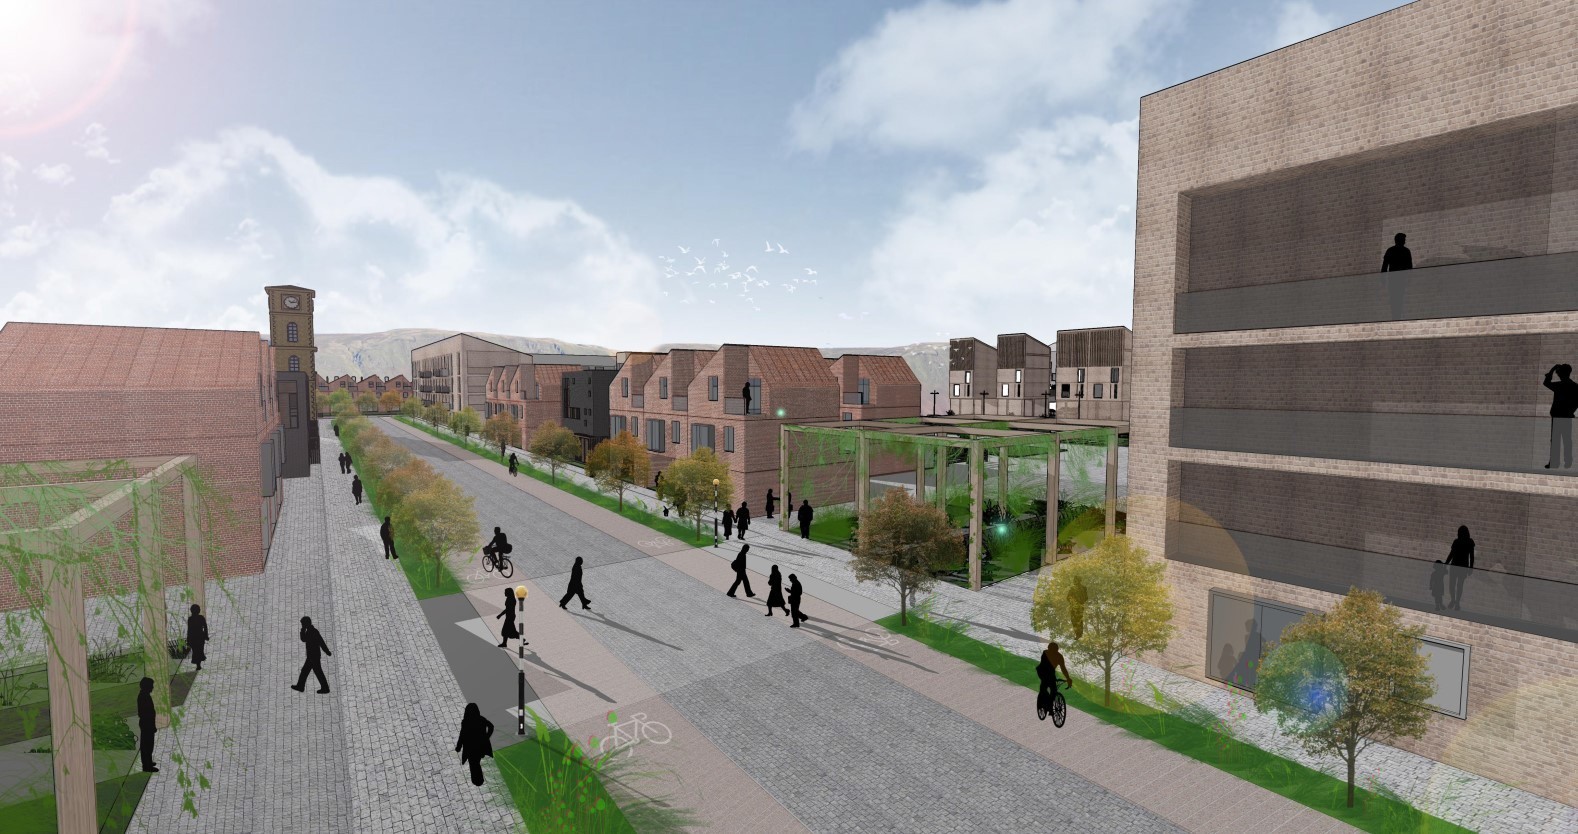 New framework outlines 30-year vision for future development of North Glasgow